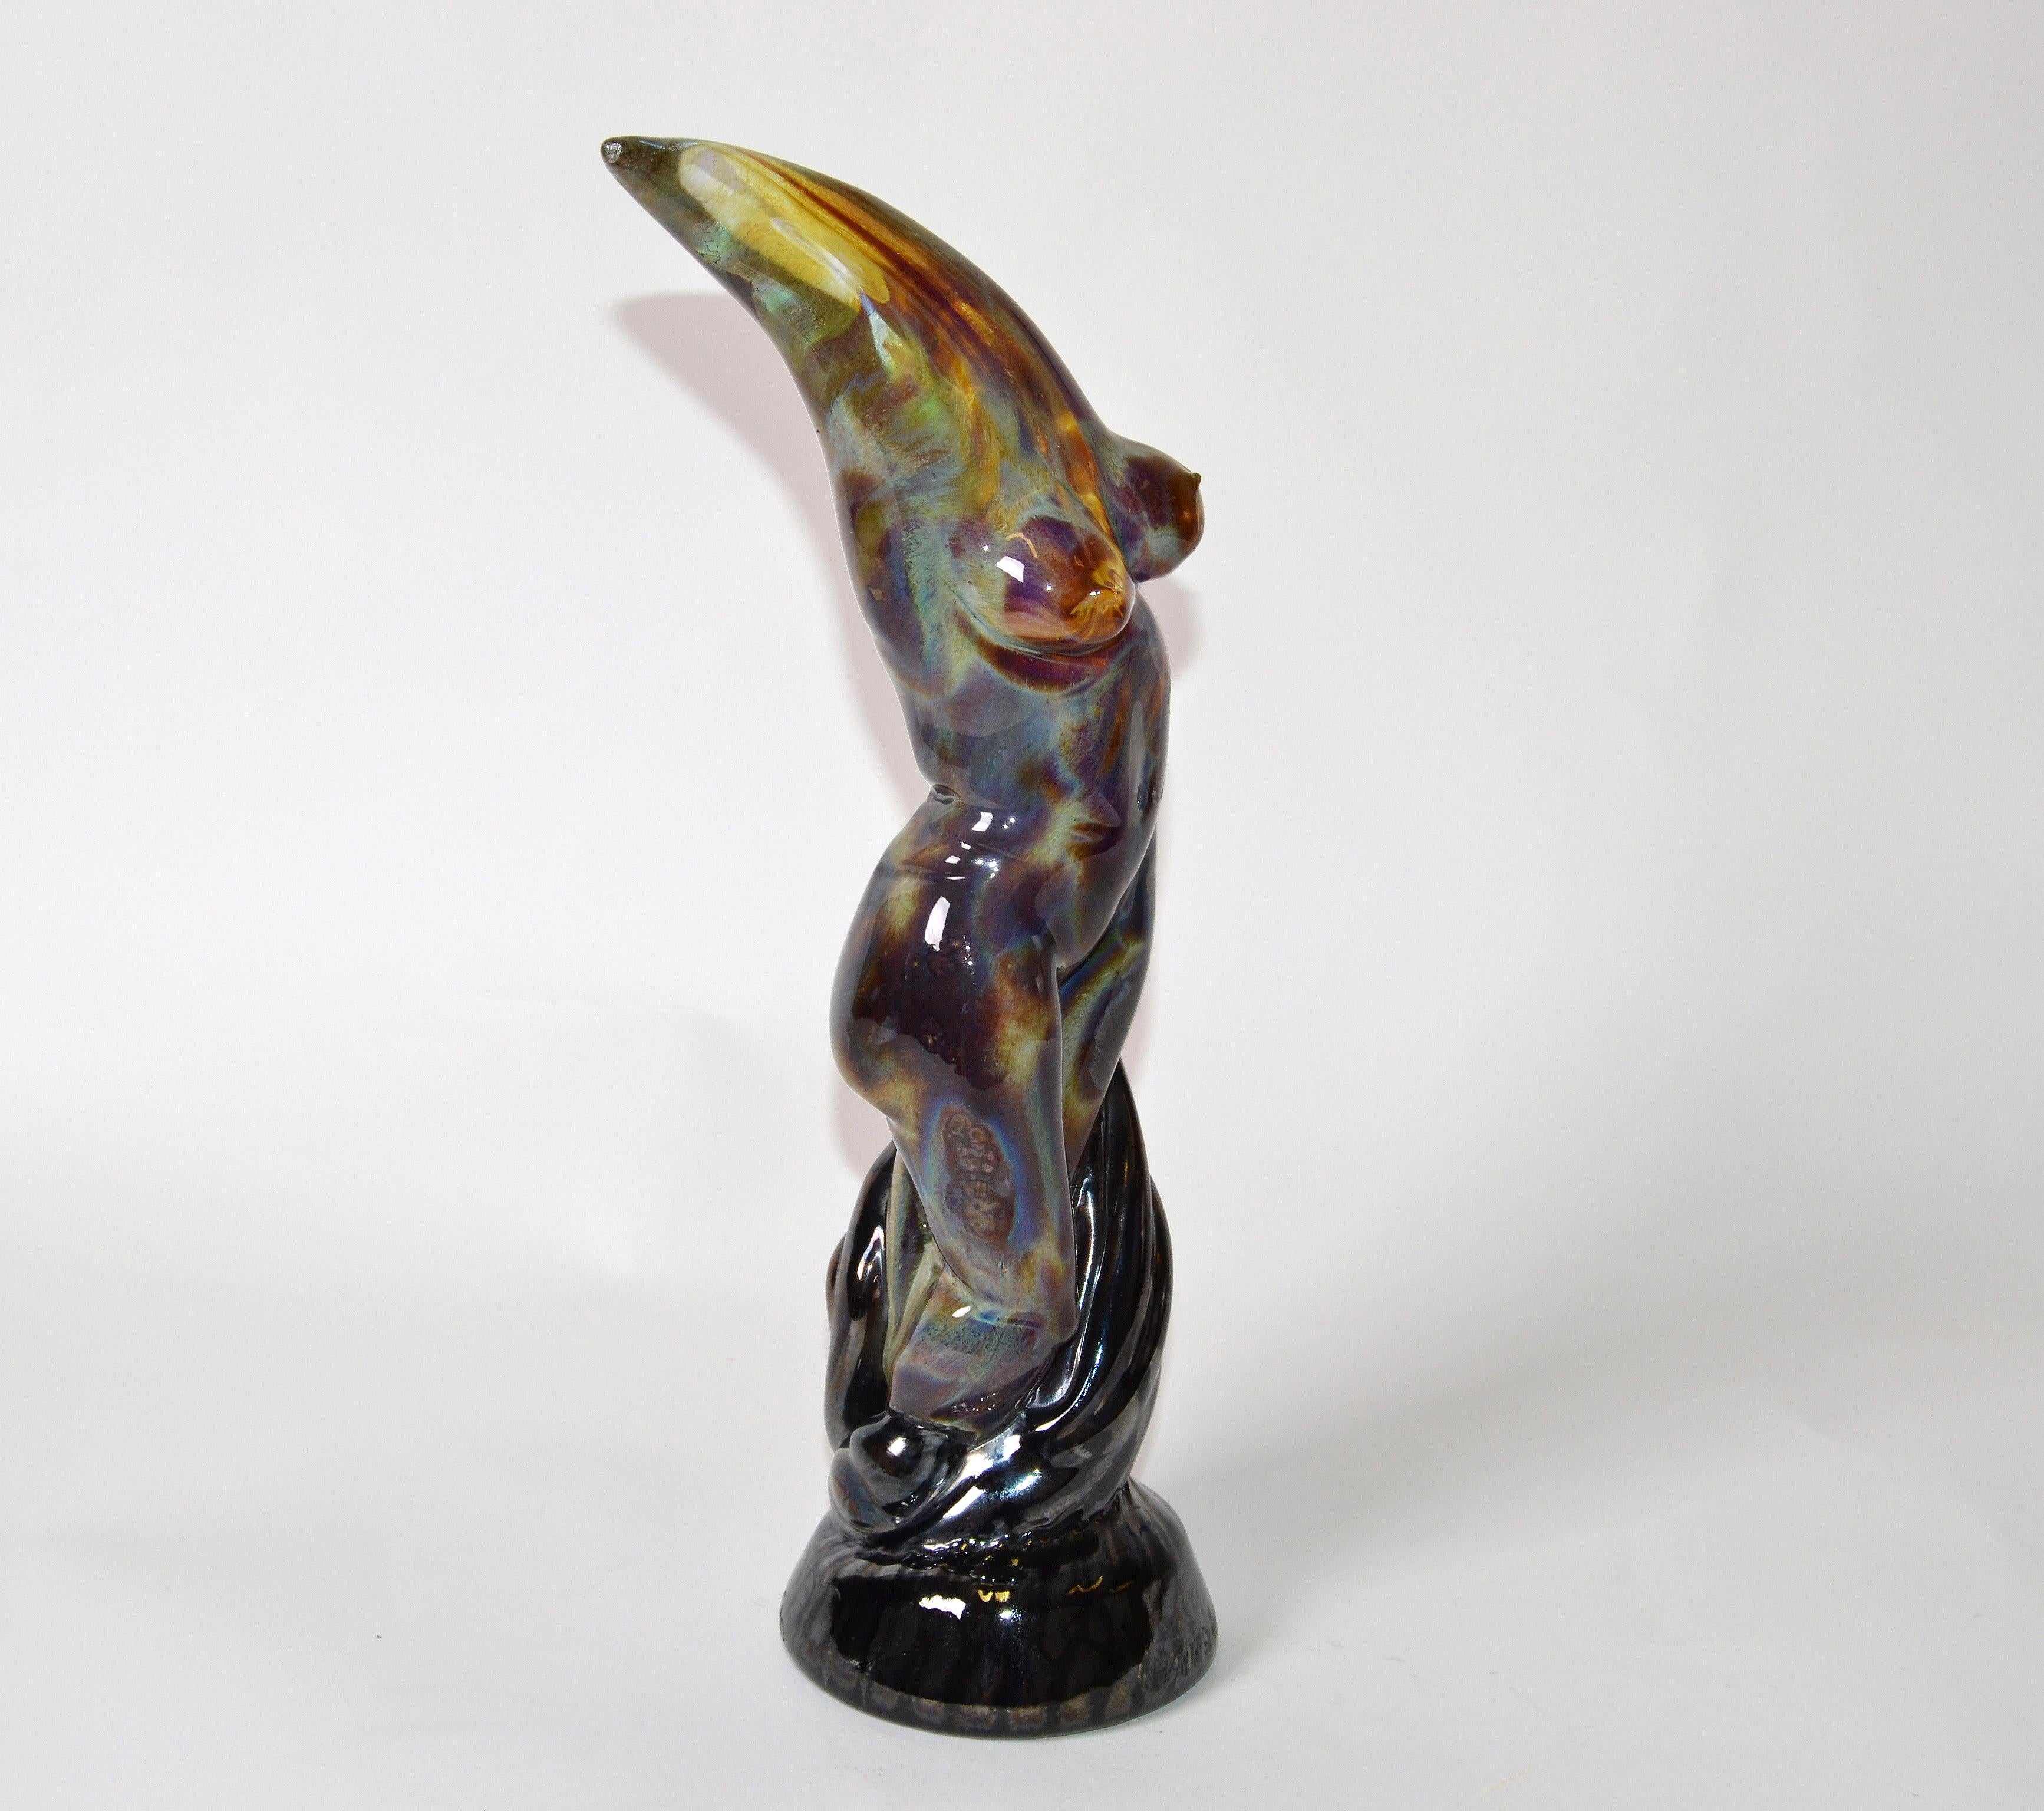 American Modern Art Glass Sculpture Nude Woman Titled The Way She Moves Signed Michael For Sale